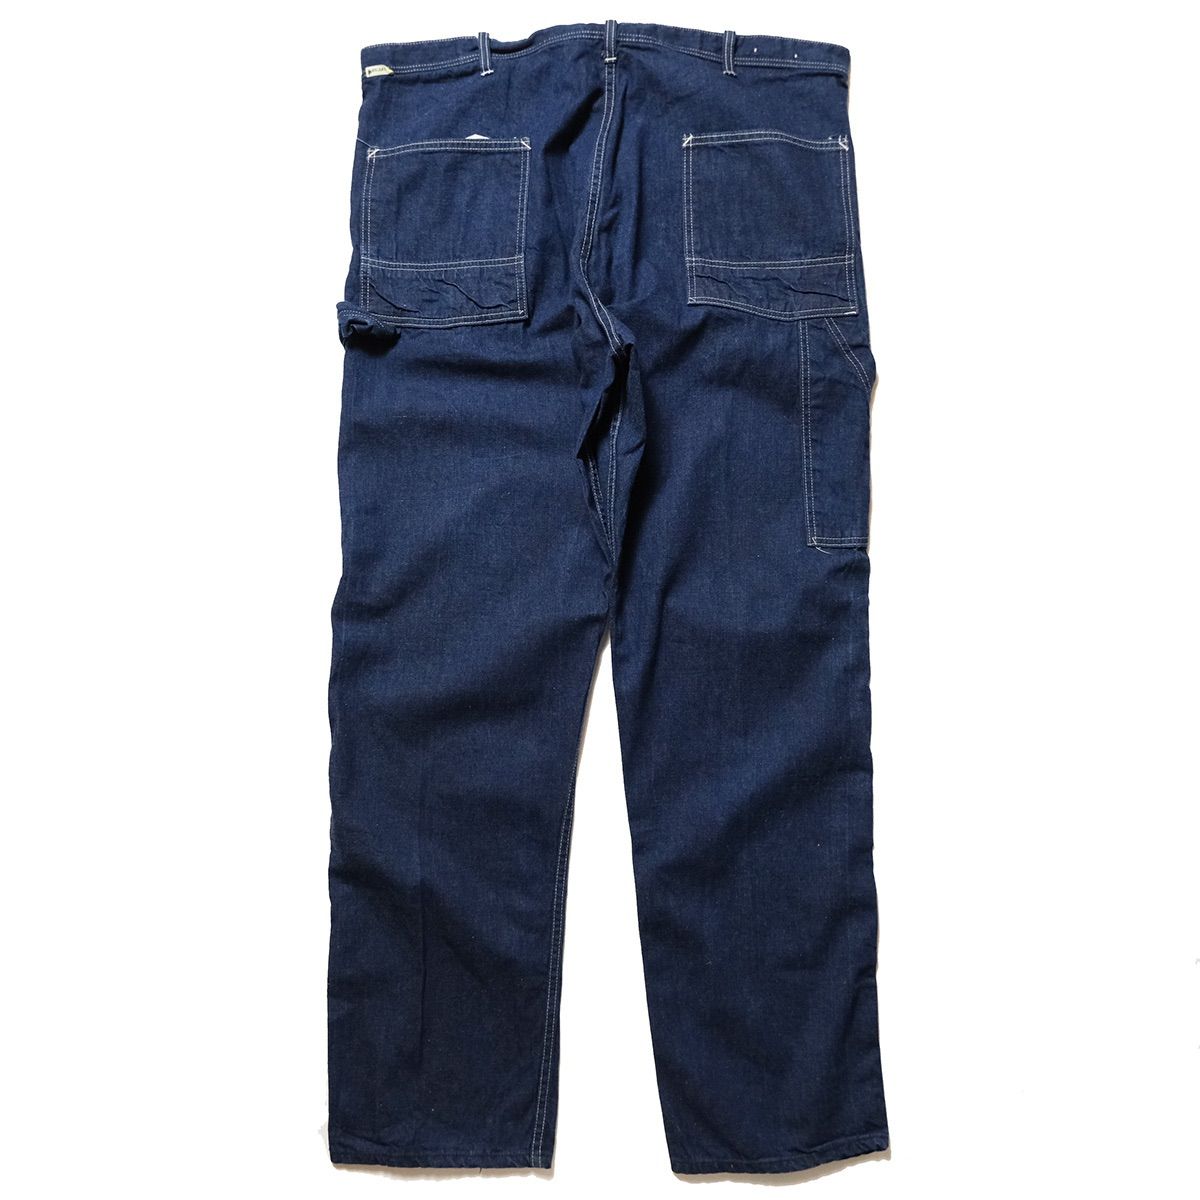 70's CARTER'S DENIM WORK PANT (about 42×34) カーターズ デニム 